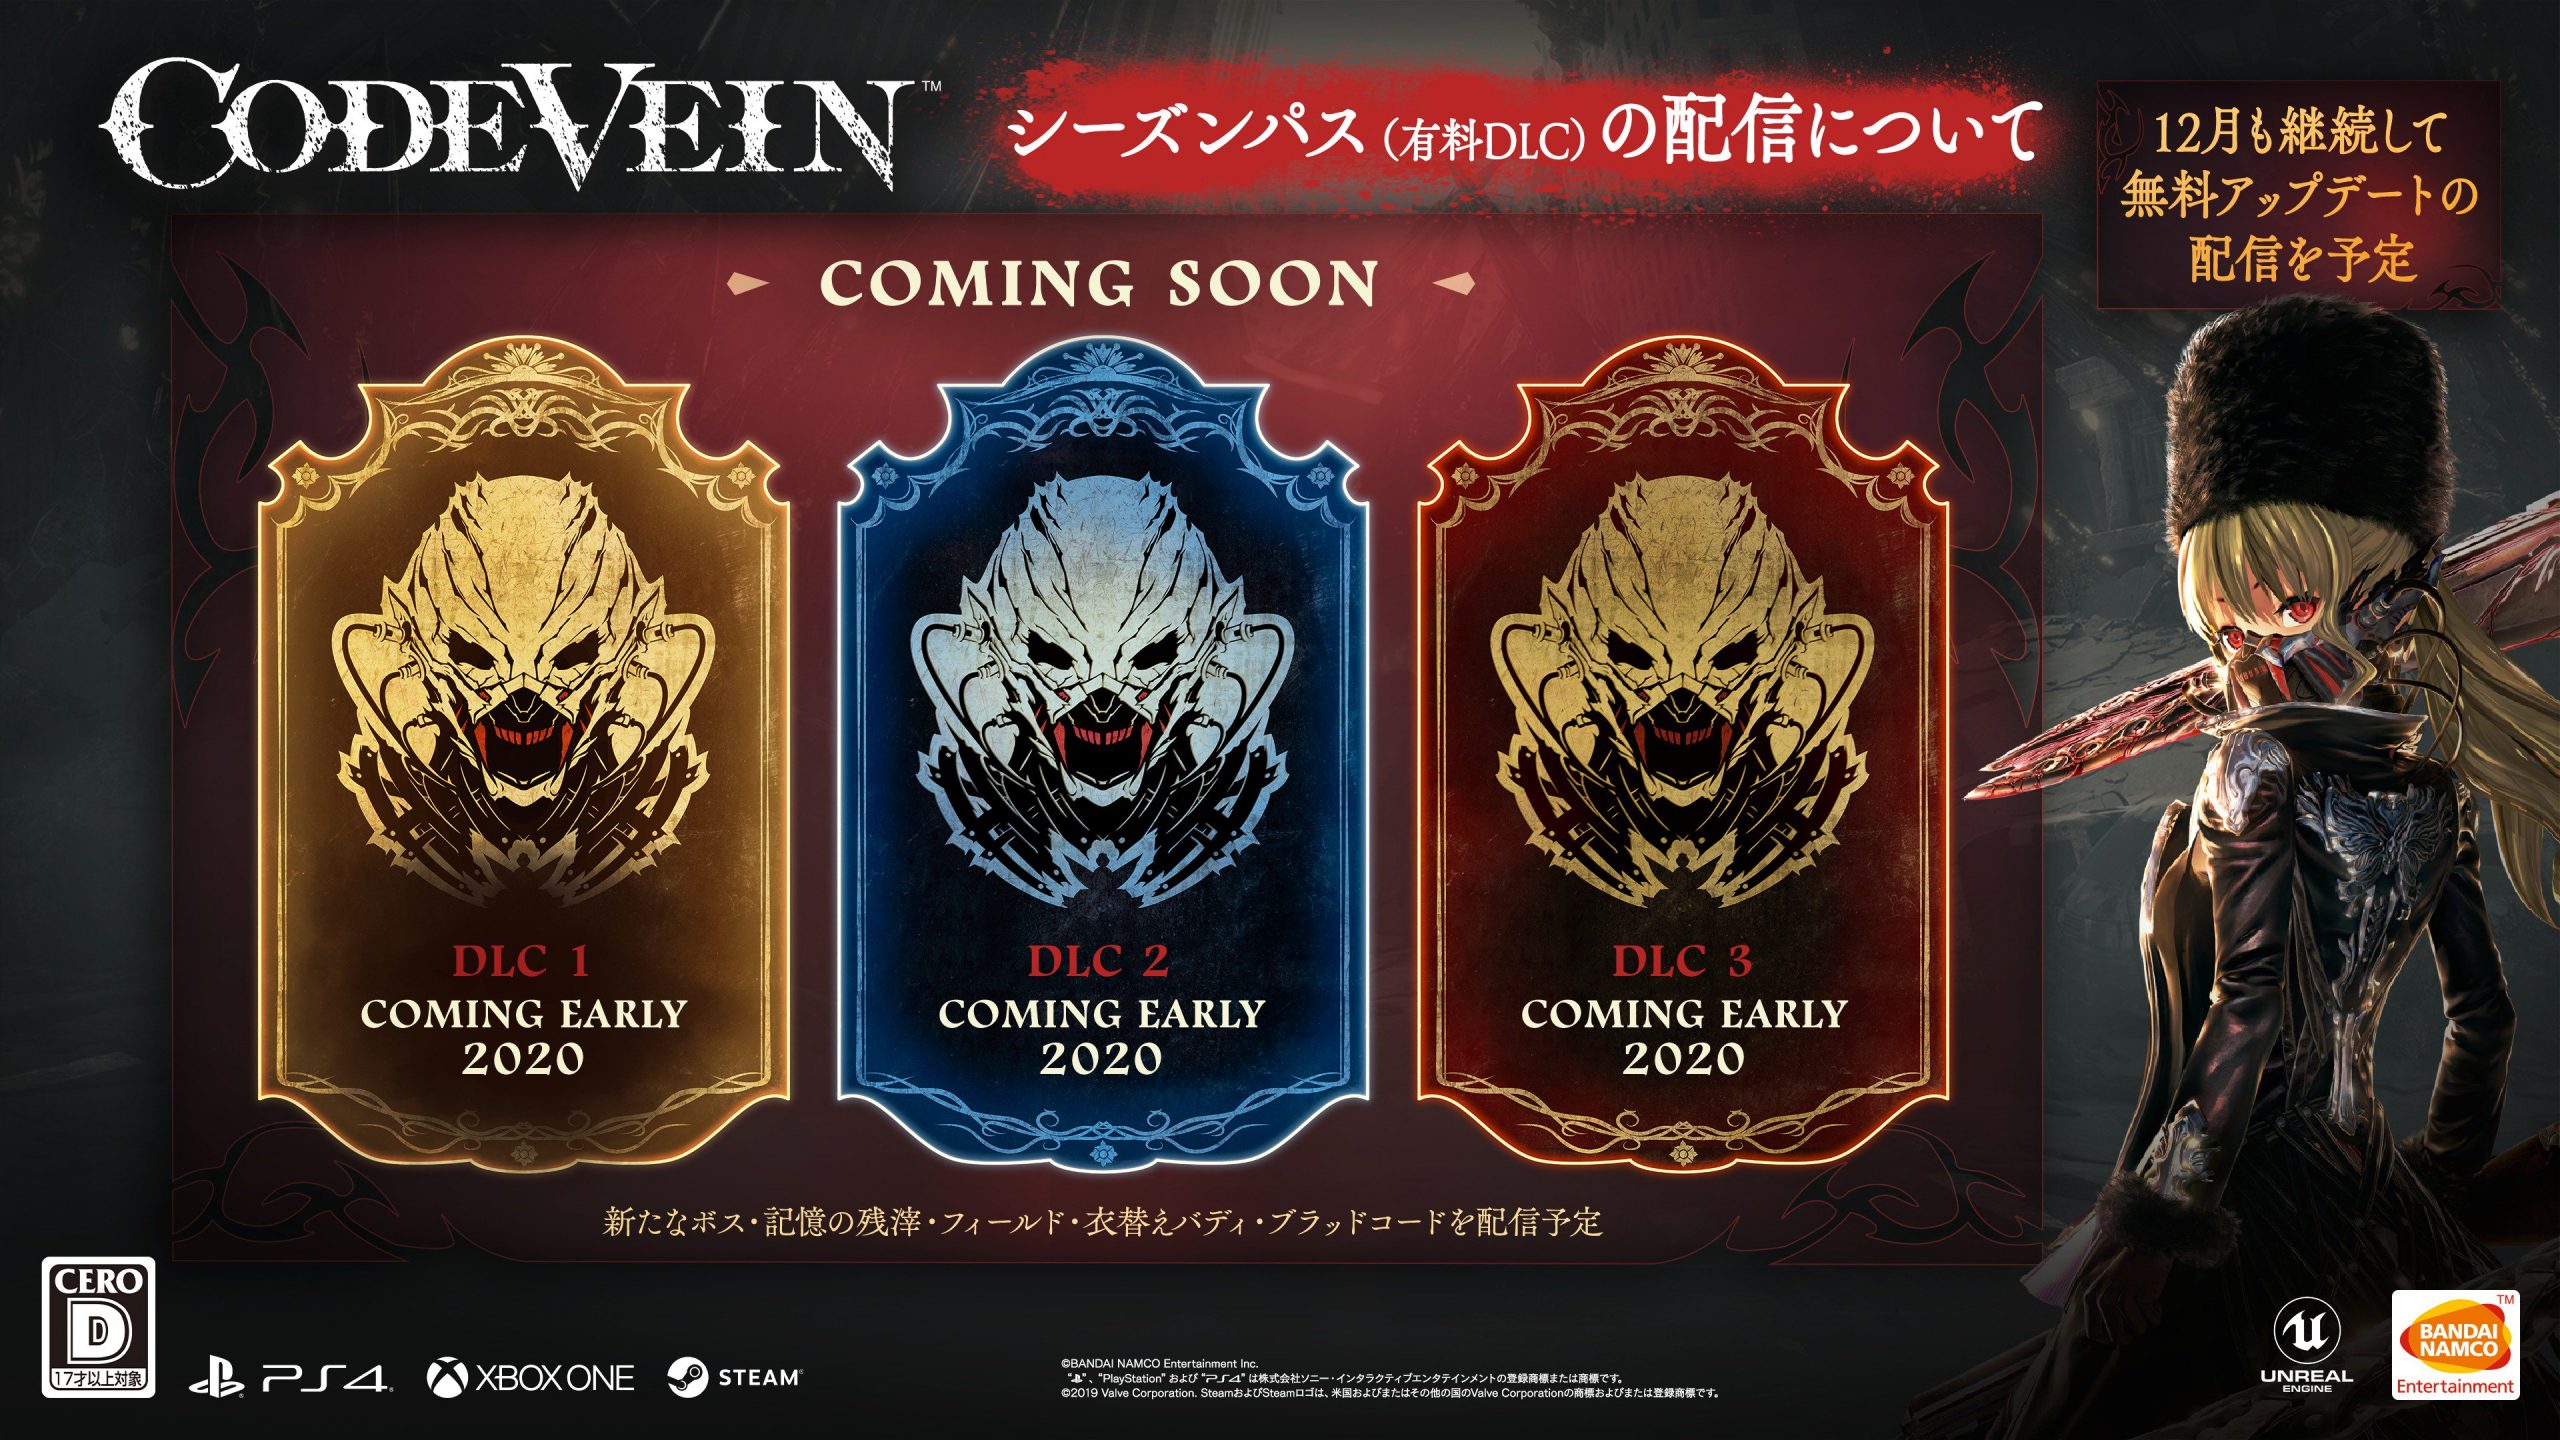 Code Vein Season Pass DLCs coming in early 2020